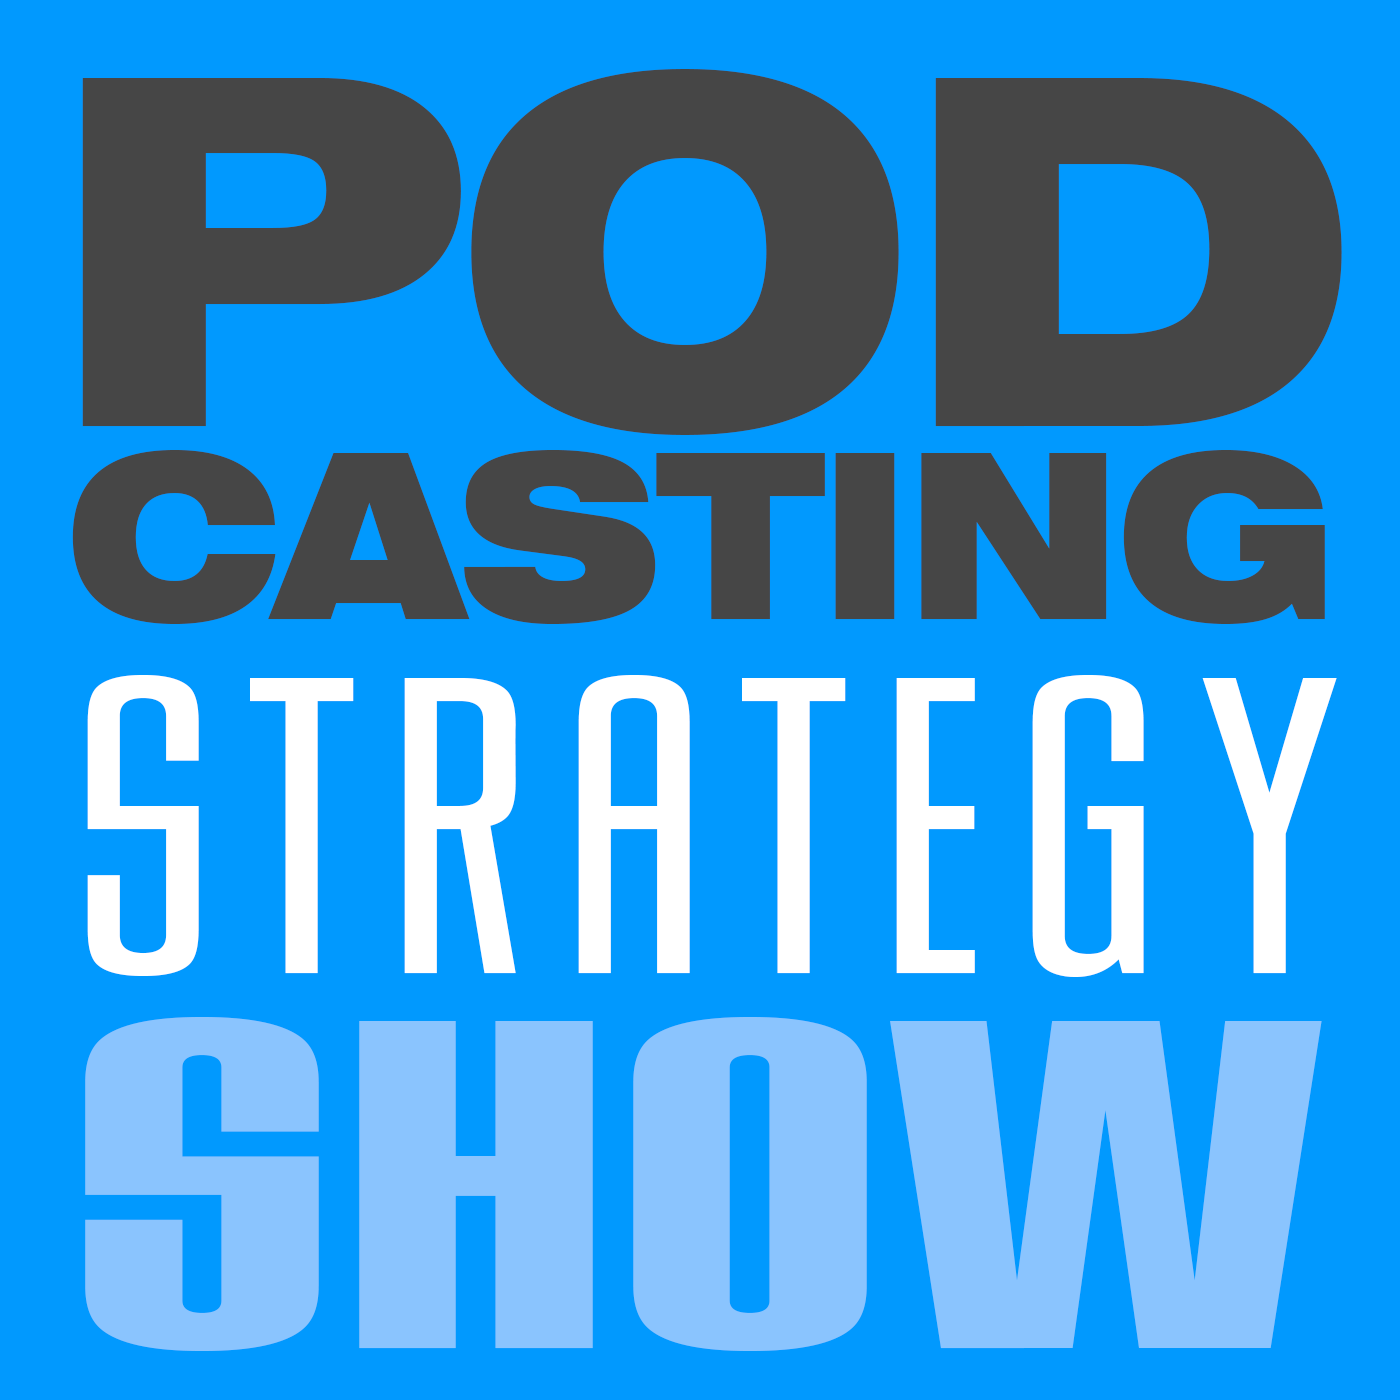 Artwork for Podcasting Strategy